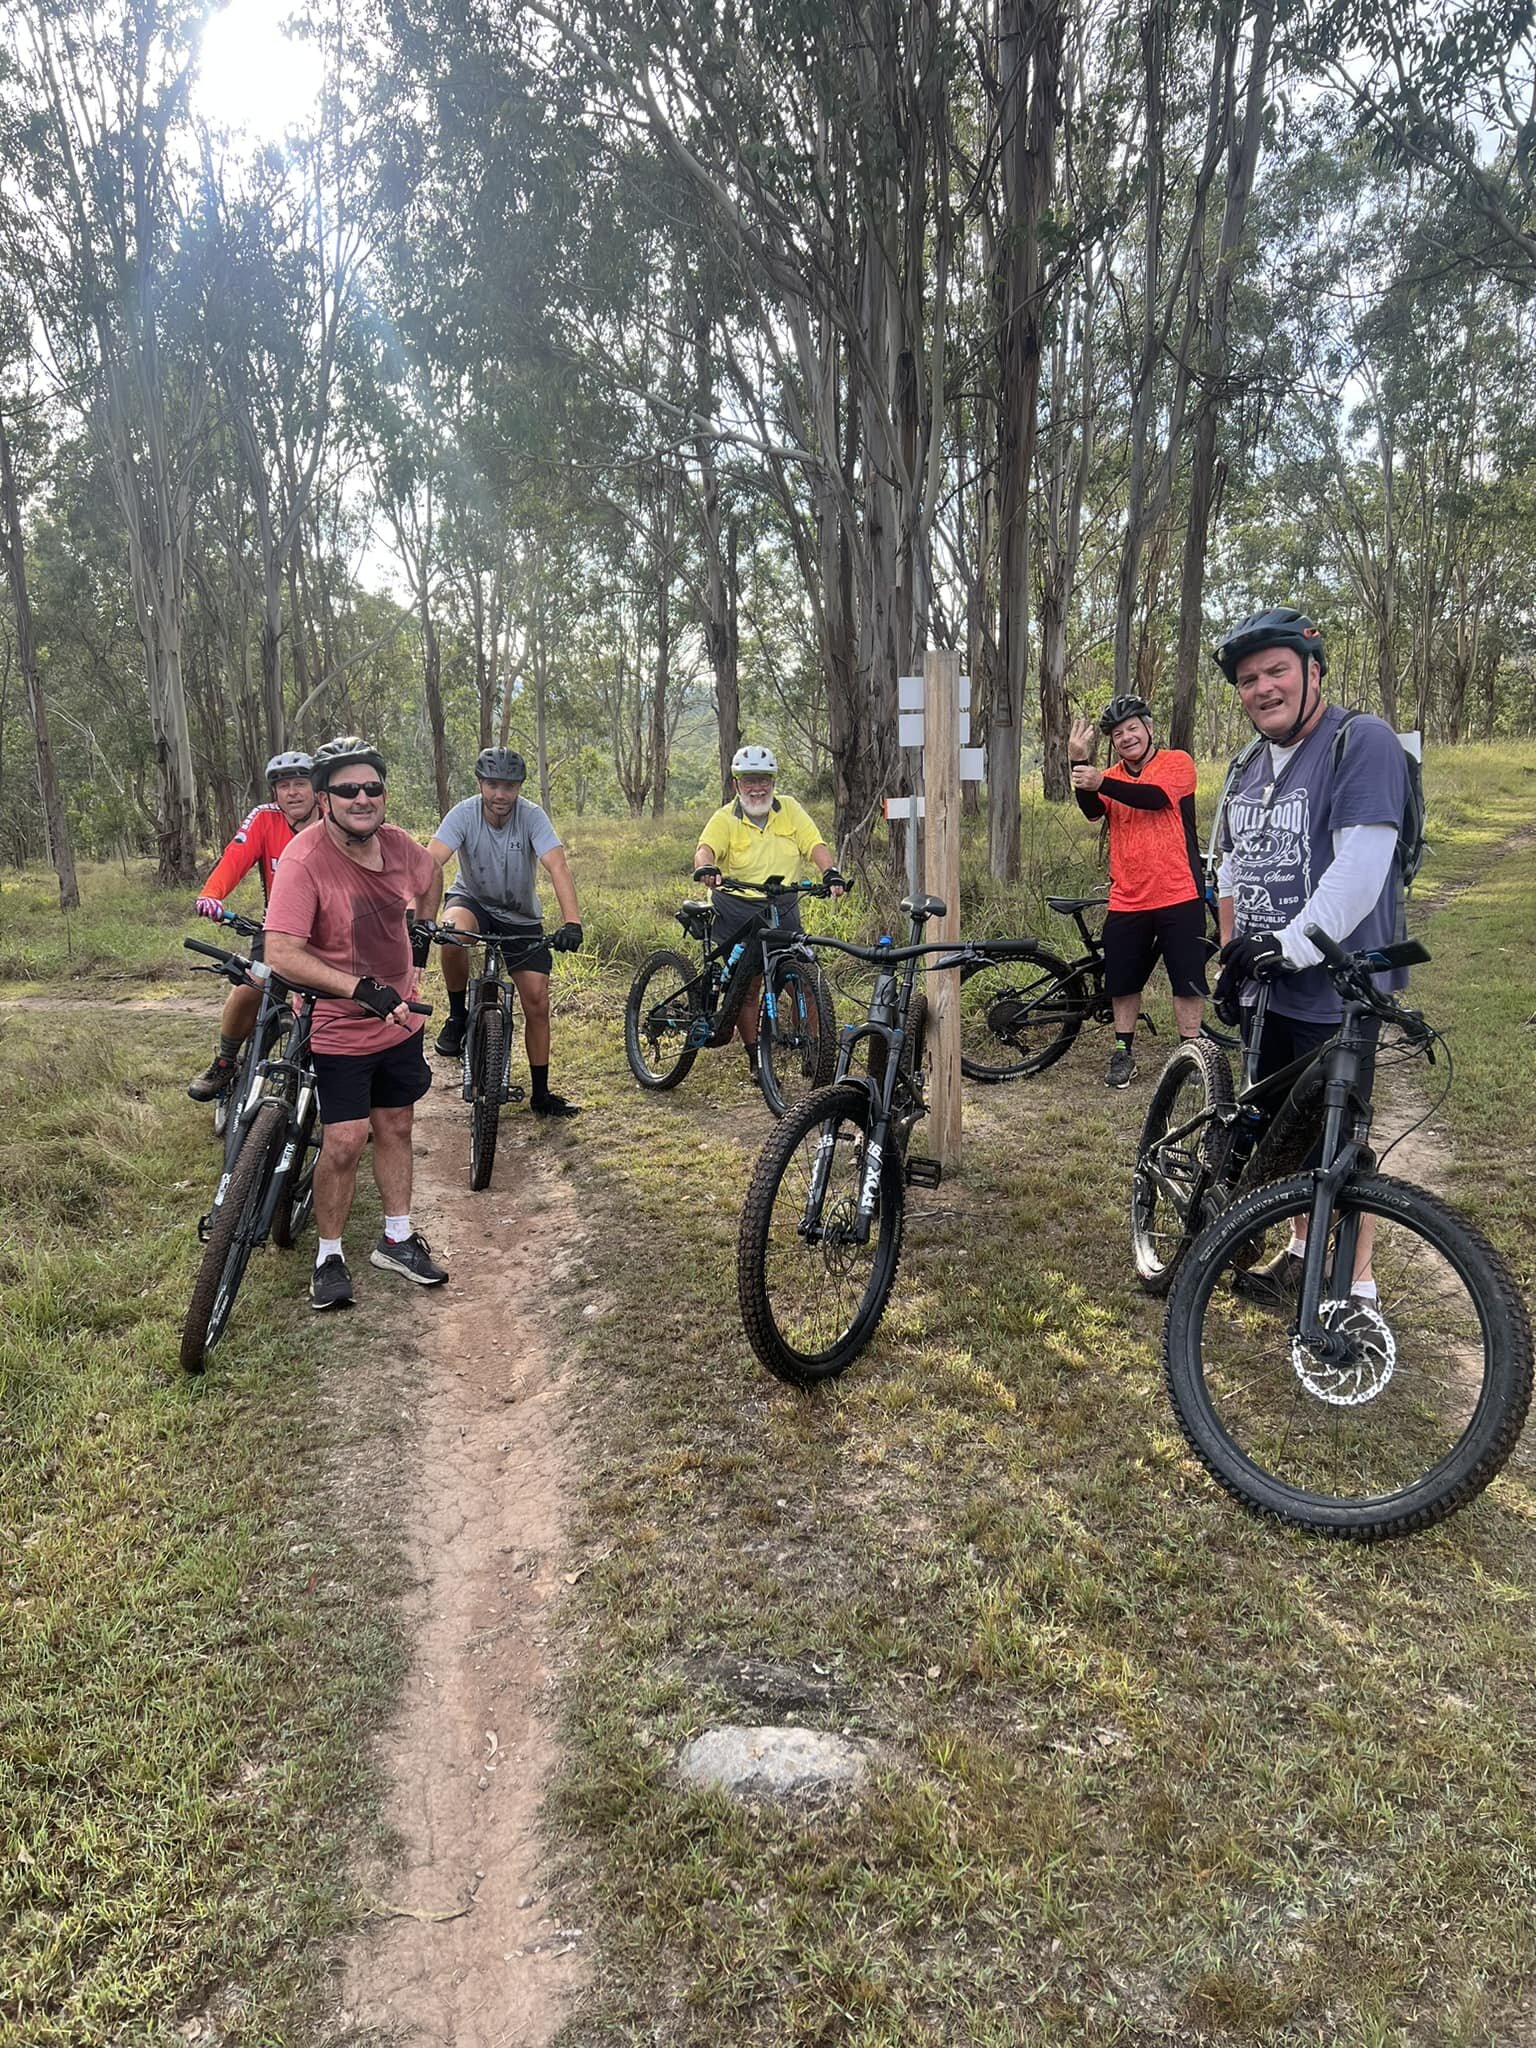 A good roll up this morning for the Satdy Socials, and glorious weather as well. Hopefully the rain holds off so everyone can get a pedal in. Granted Ride Mountainbike shuttles up and running this morning, so get amongst it .